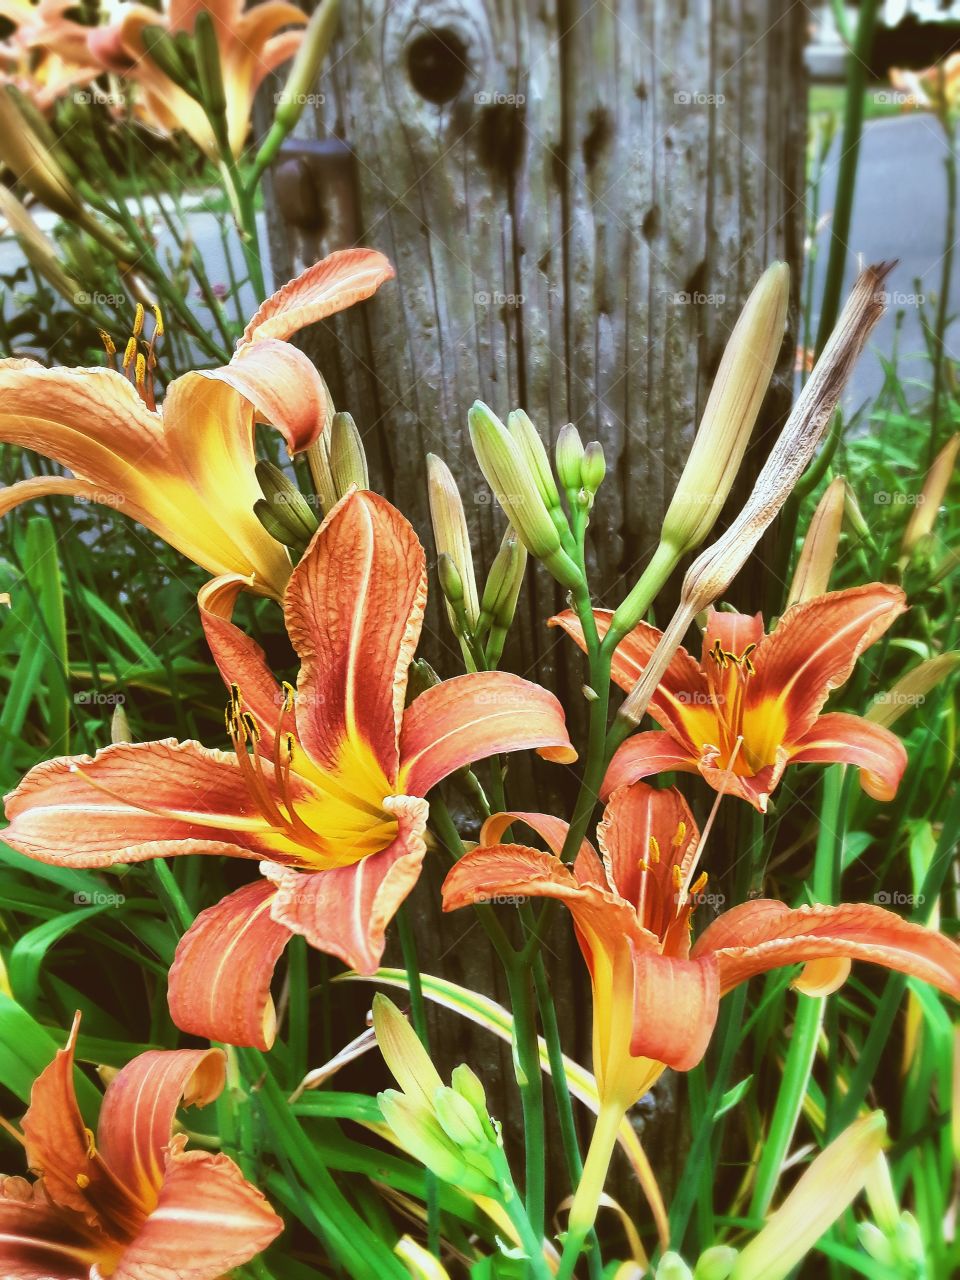 Lilies in front of a utility pole